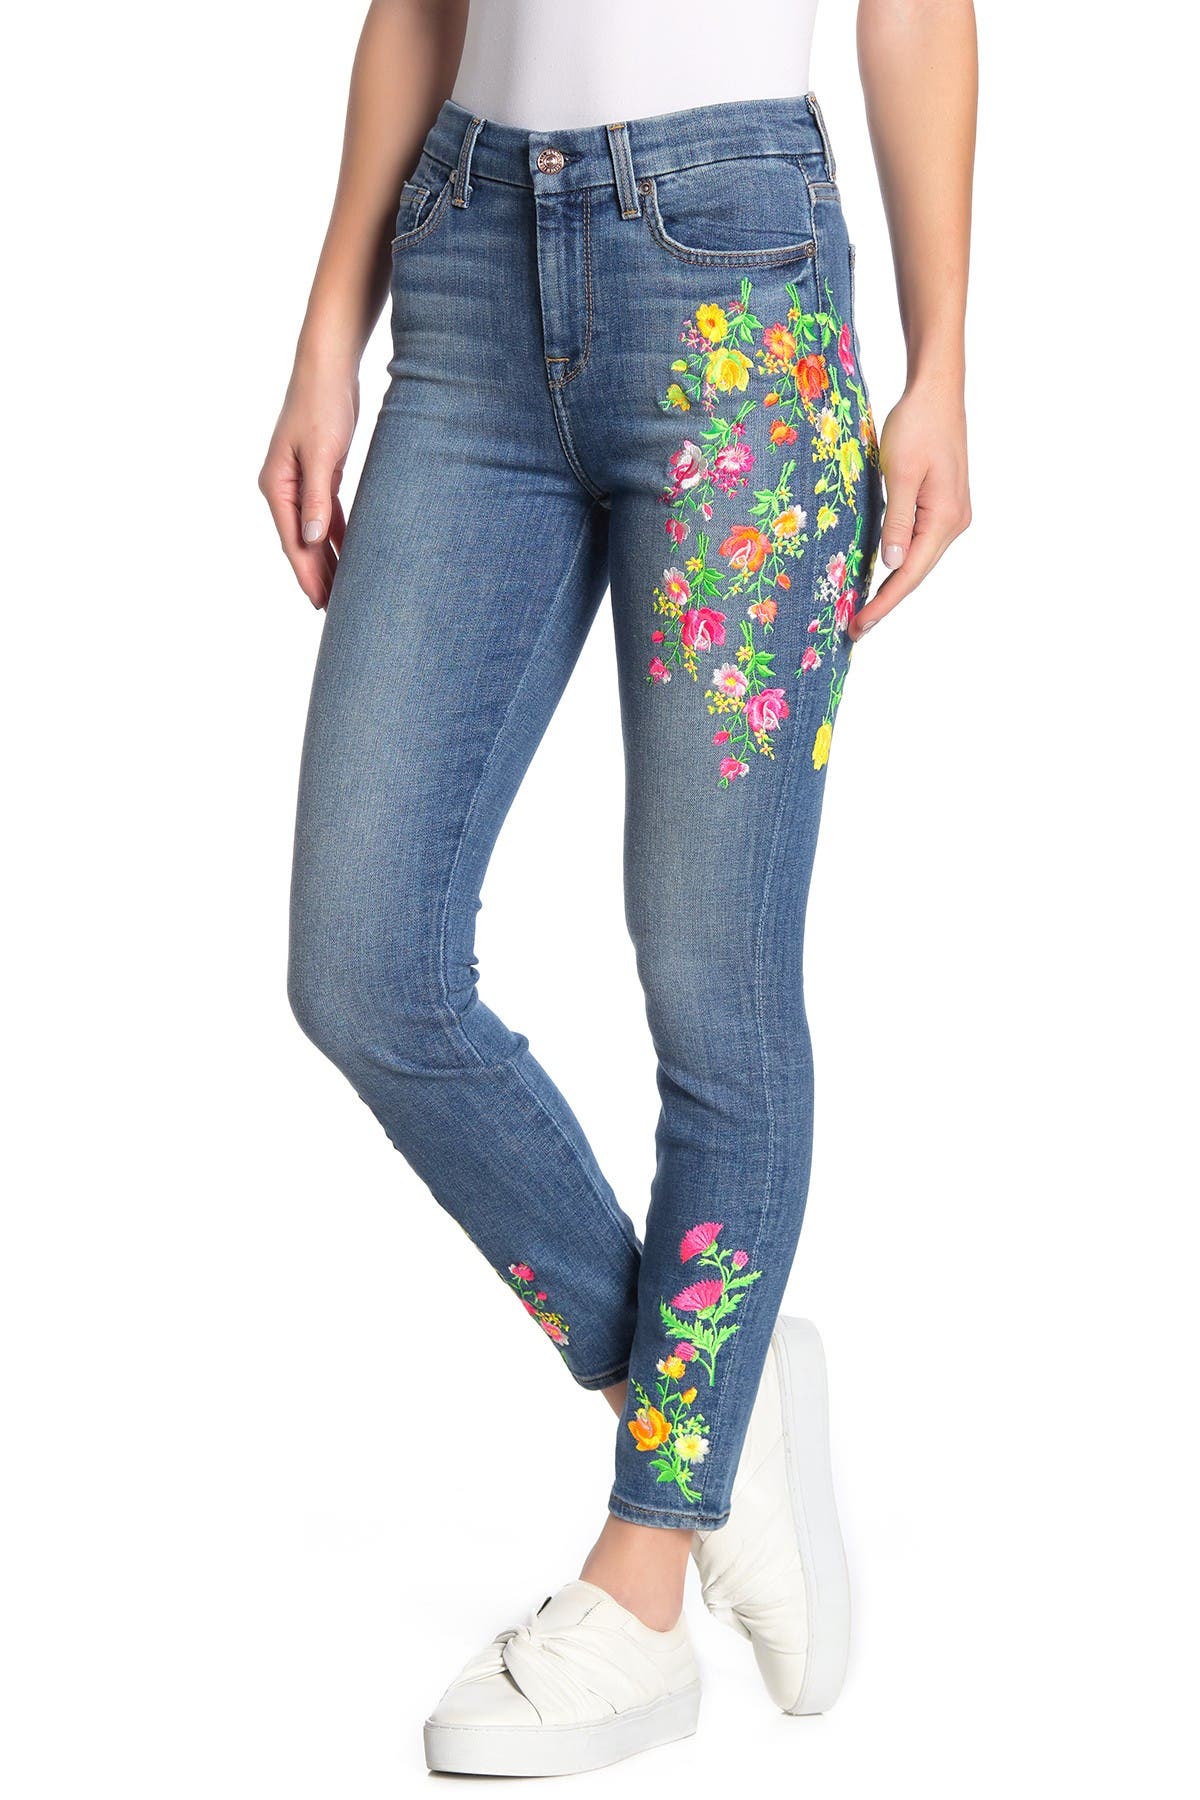 7 for all mankind embroidered jeans